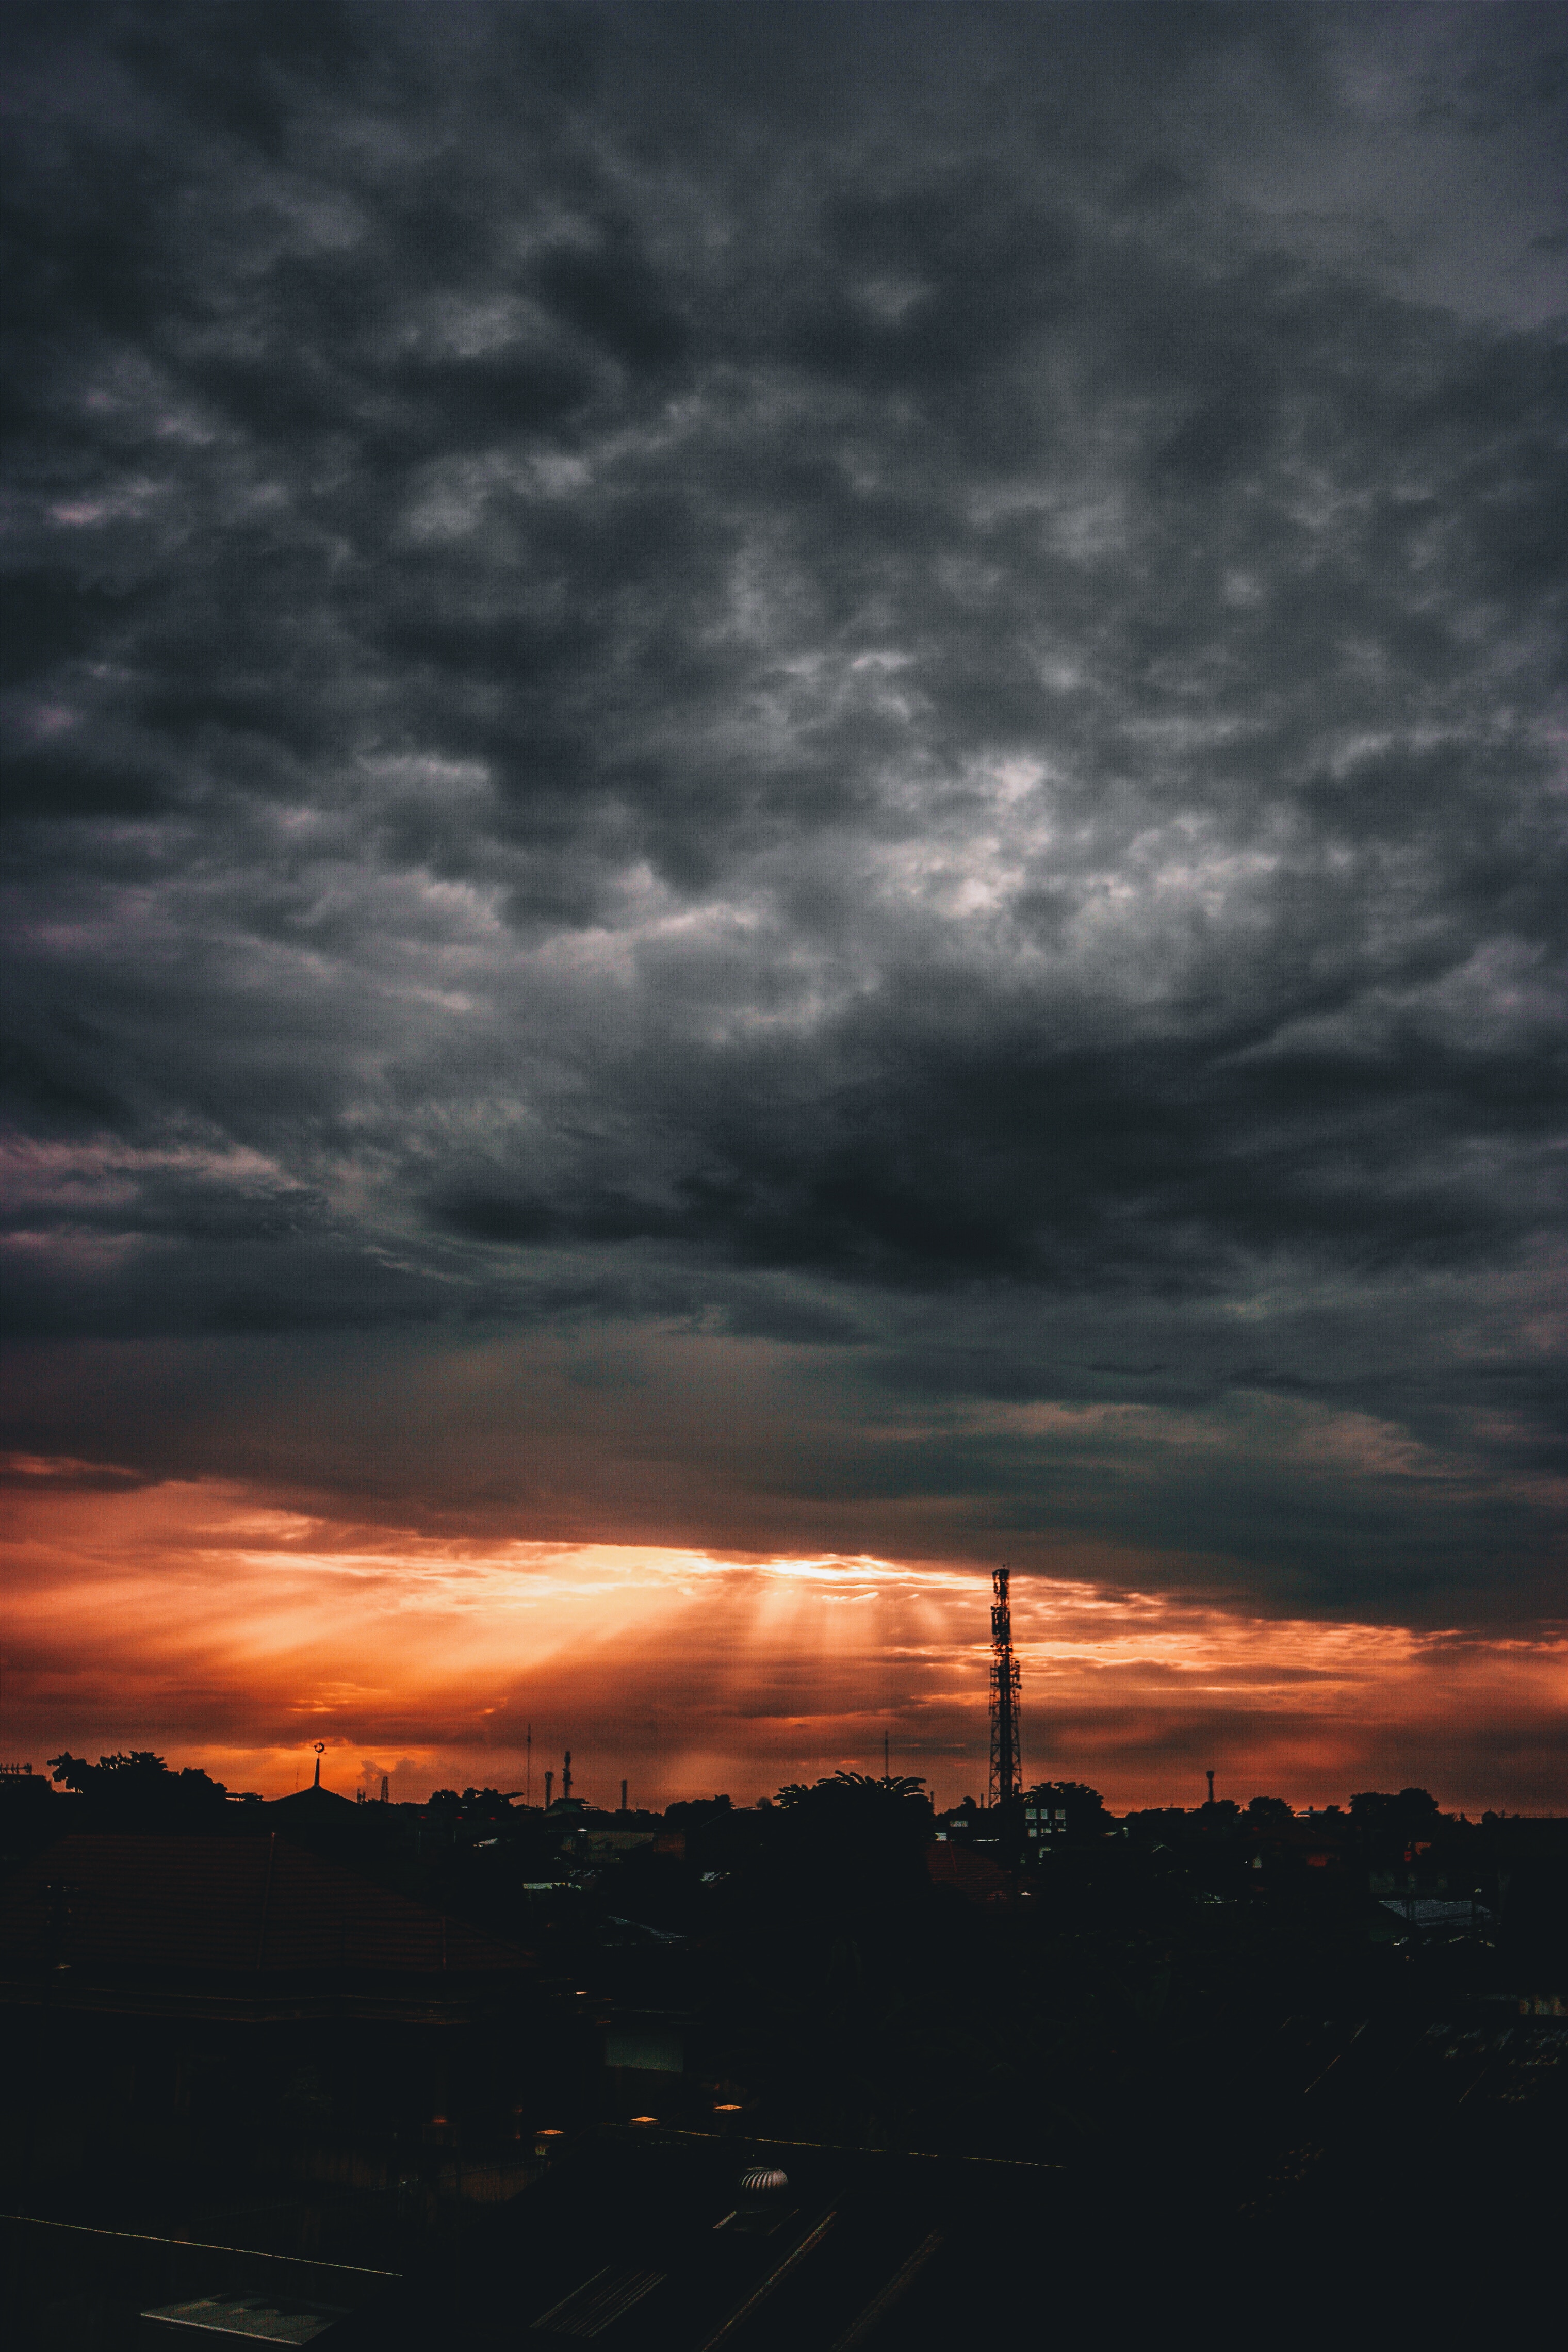 mainly cloudy, dark, indonesia, night, clouds, night city, overcast cellphone